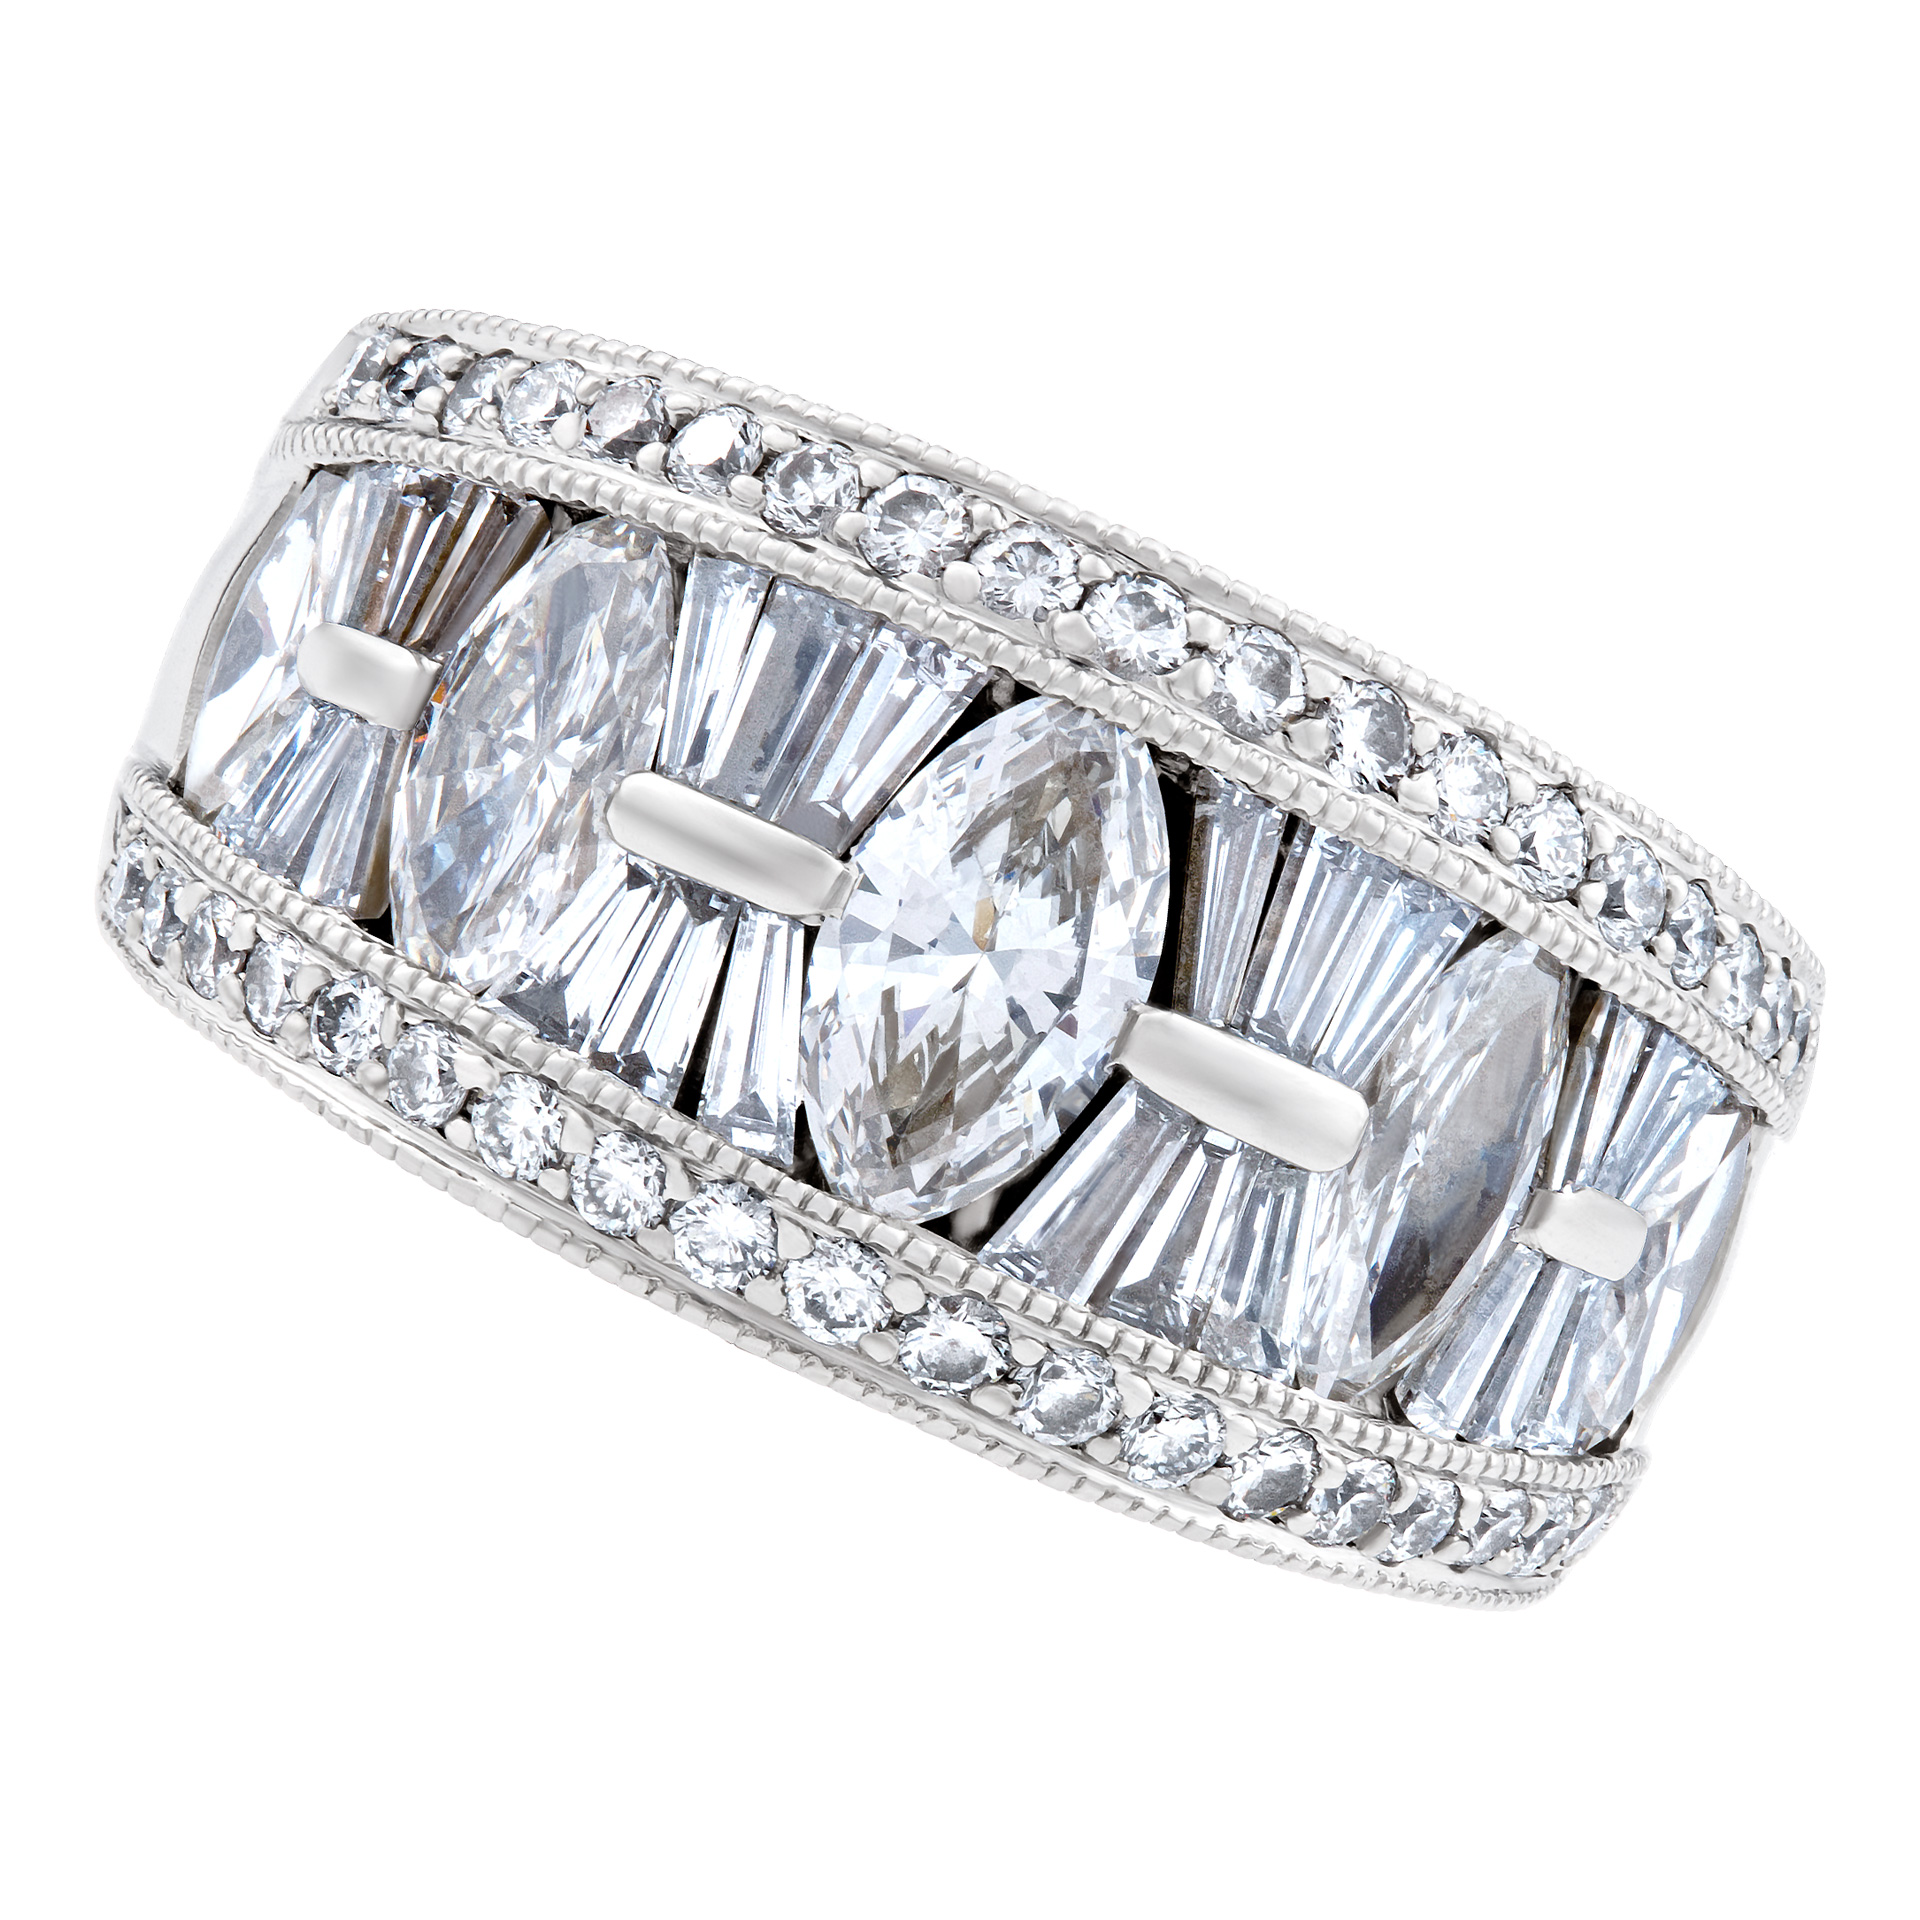 JB Star ring with marquise and round diamonds in platinum